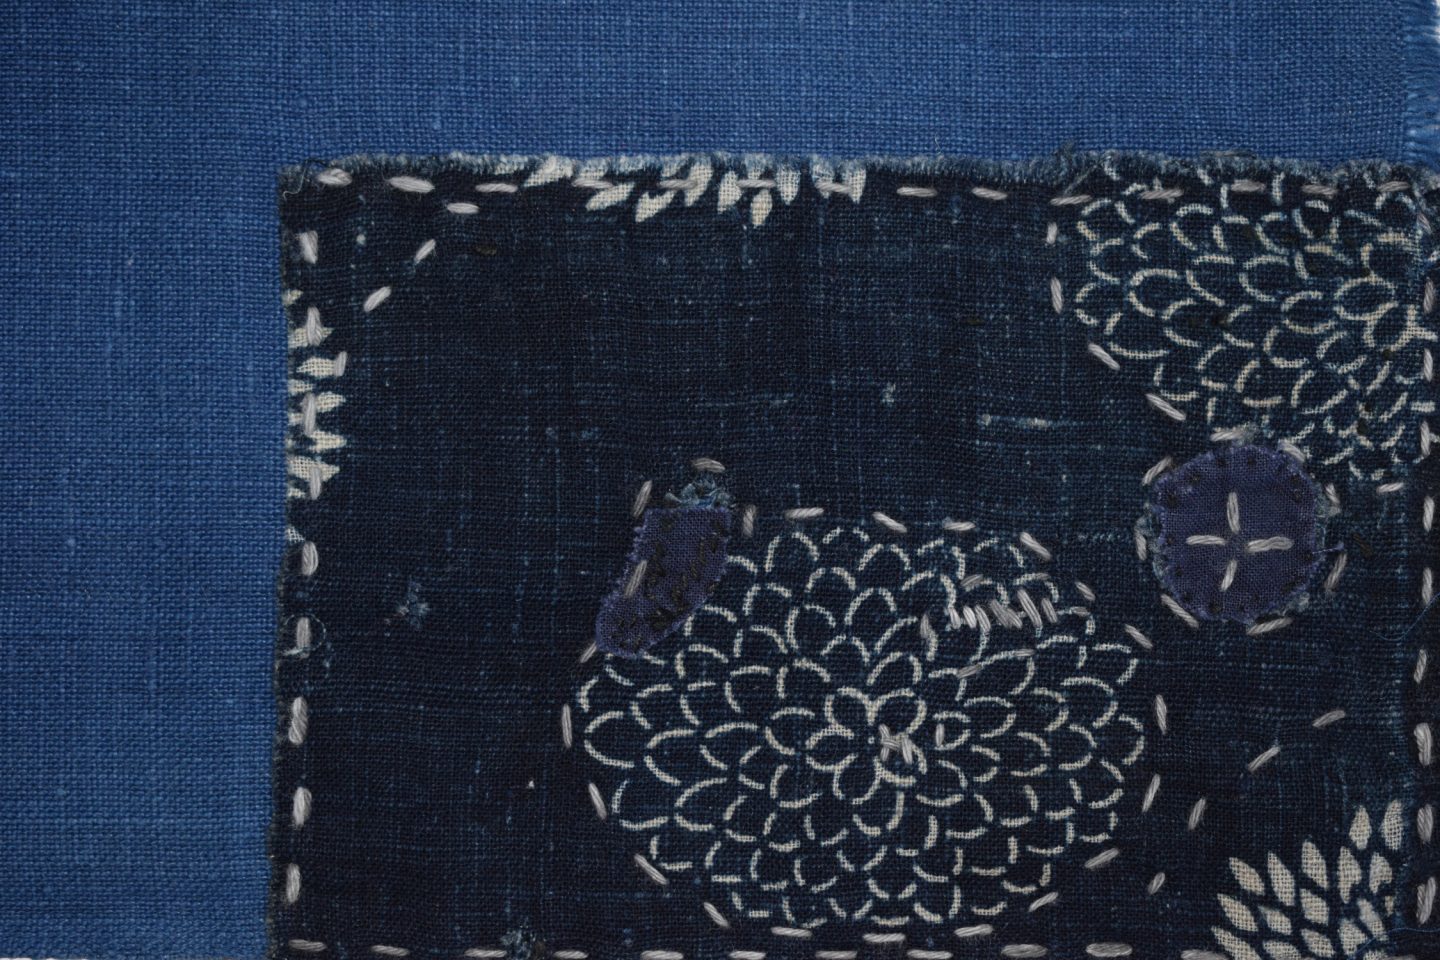 A stitched and patterned piece of fabric